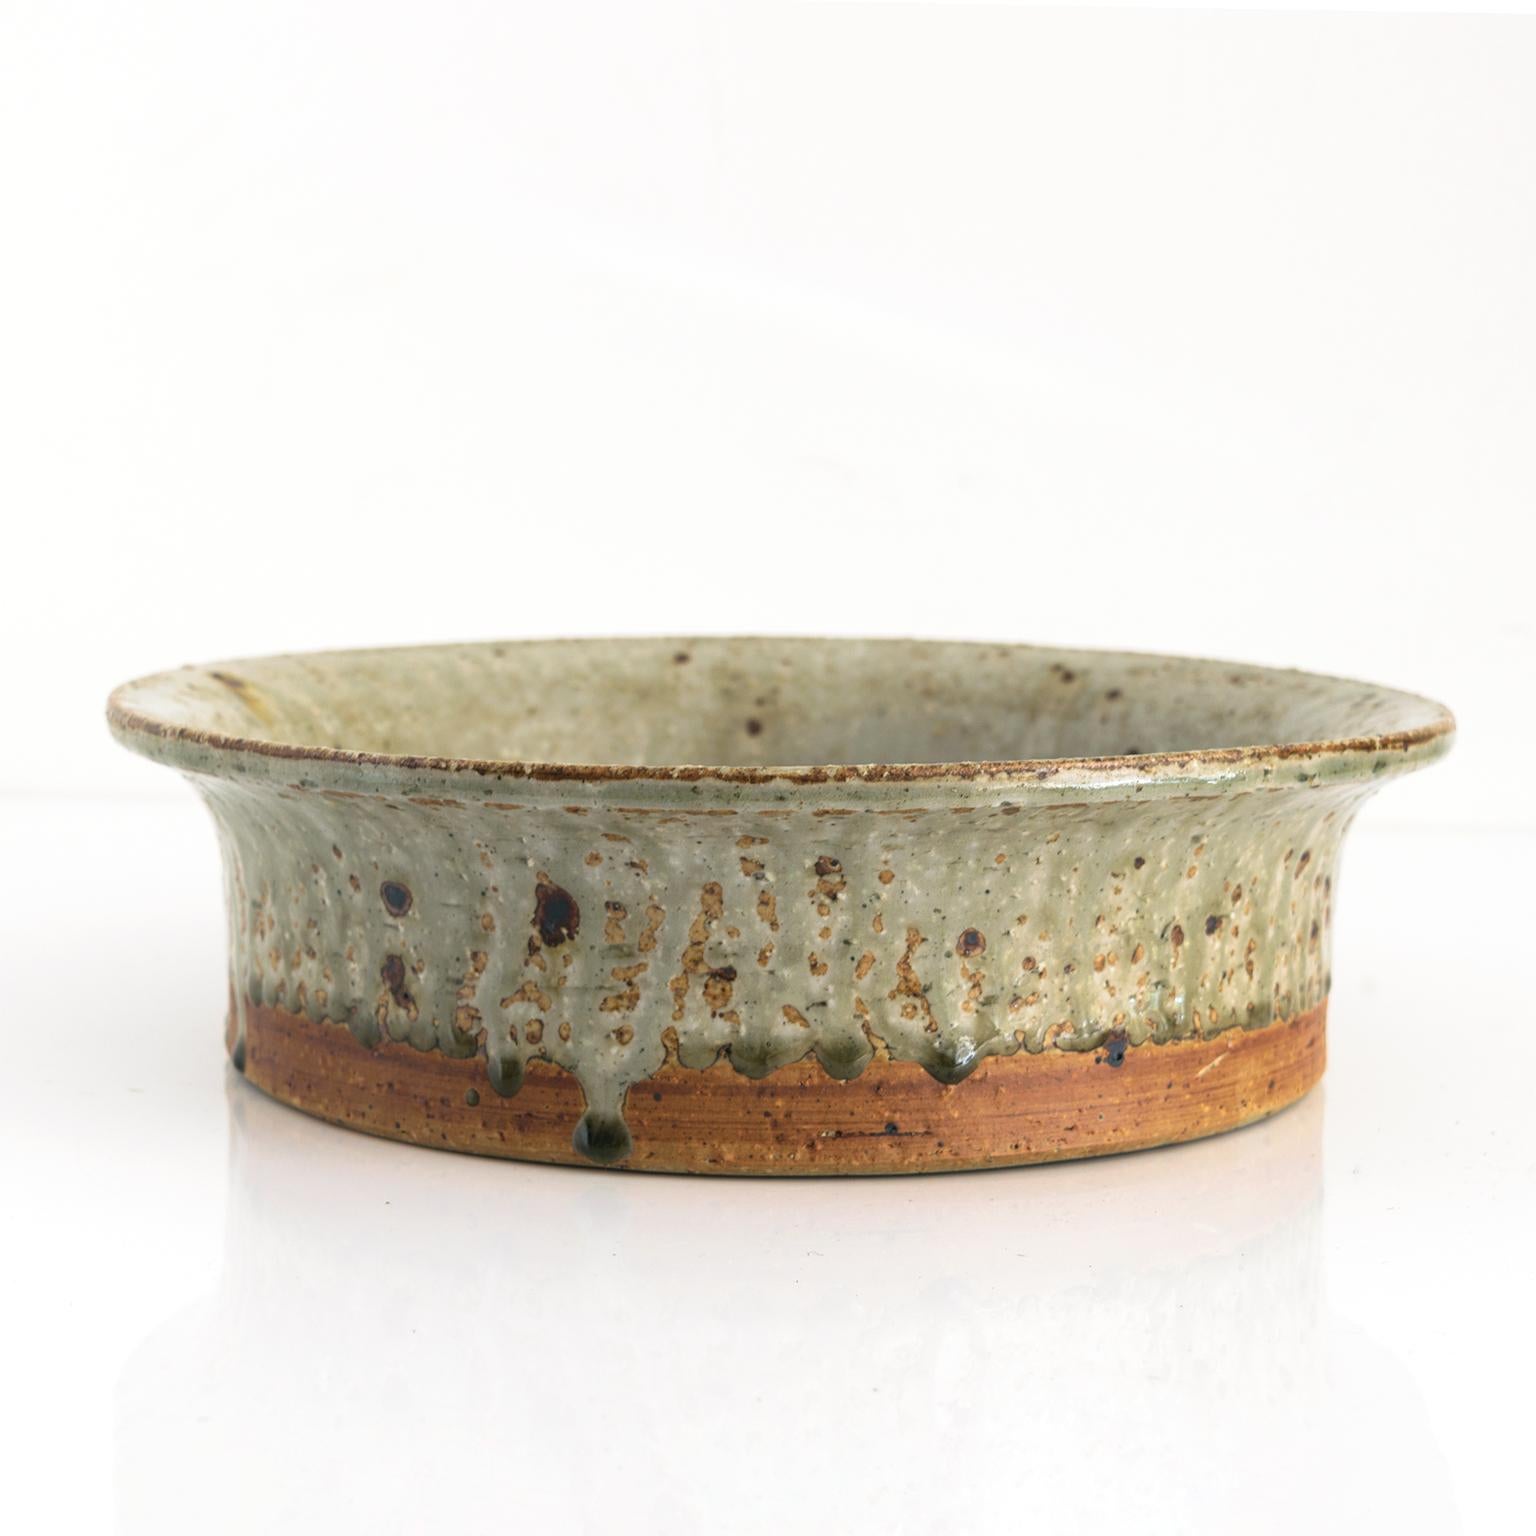 Hand-Crafted Marianne Westman for Rorstrand Atelje Glazed Stoneware Bowl Signed, 1960 For Sale